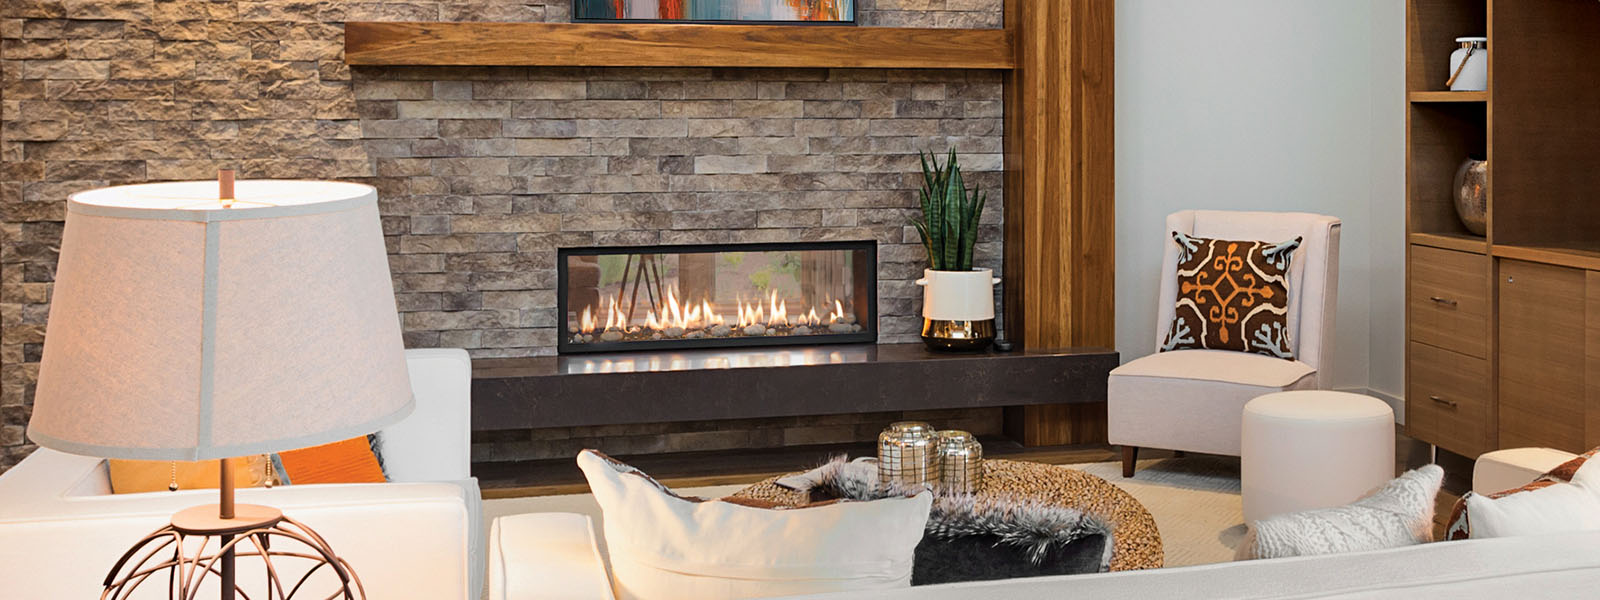 FireplaceX Linear Premium Gas Fireplaces